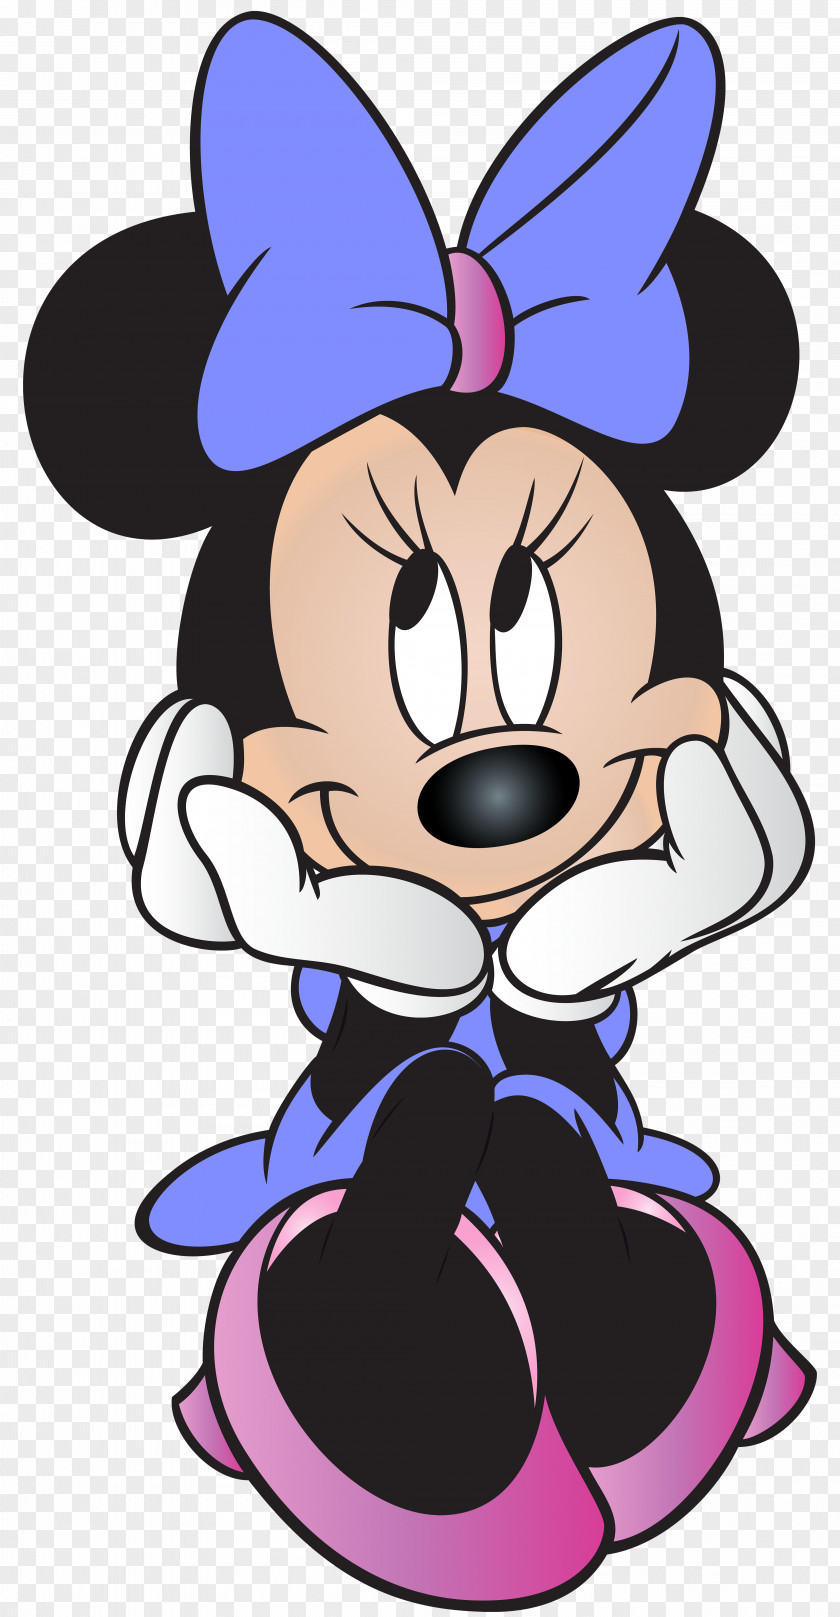 Minnie Mouse Free Clip Art Image Mickey Pluto Donald Duck Goofy PNG